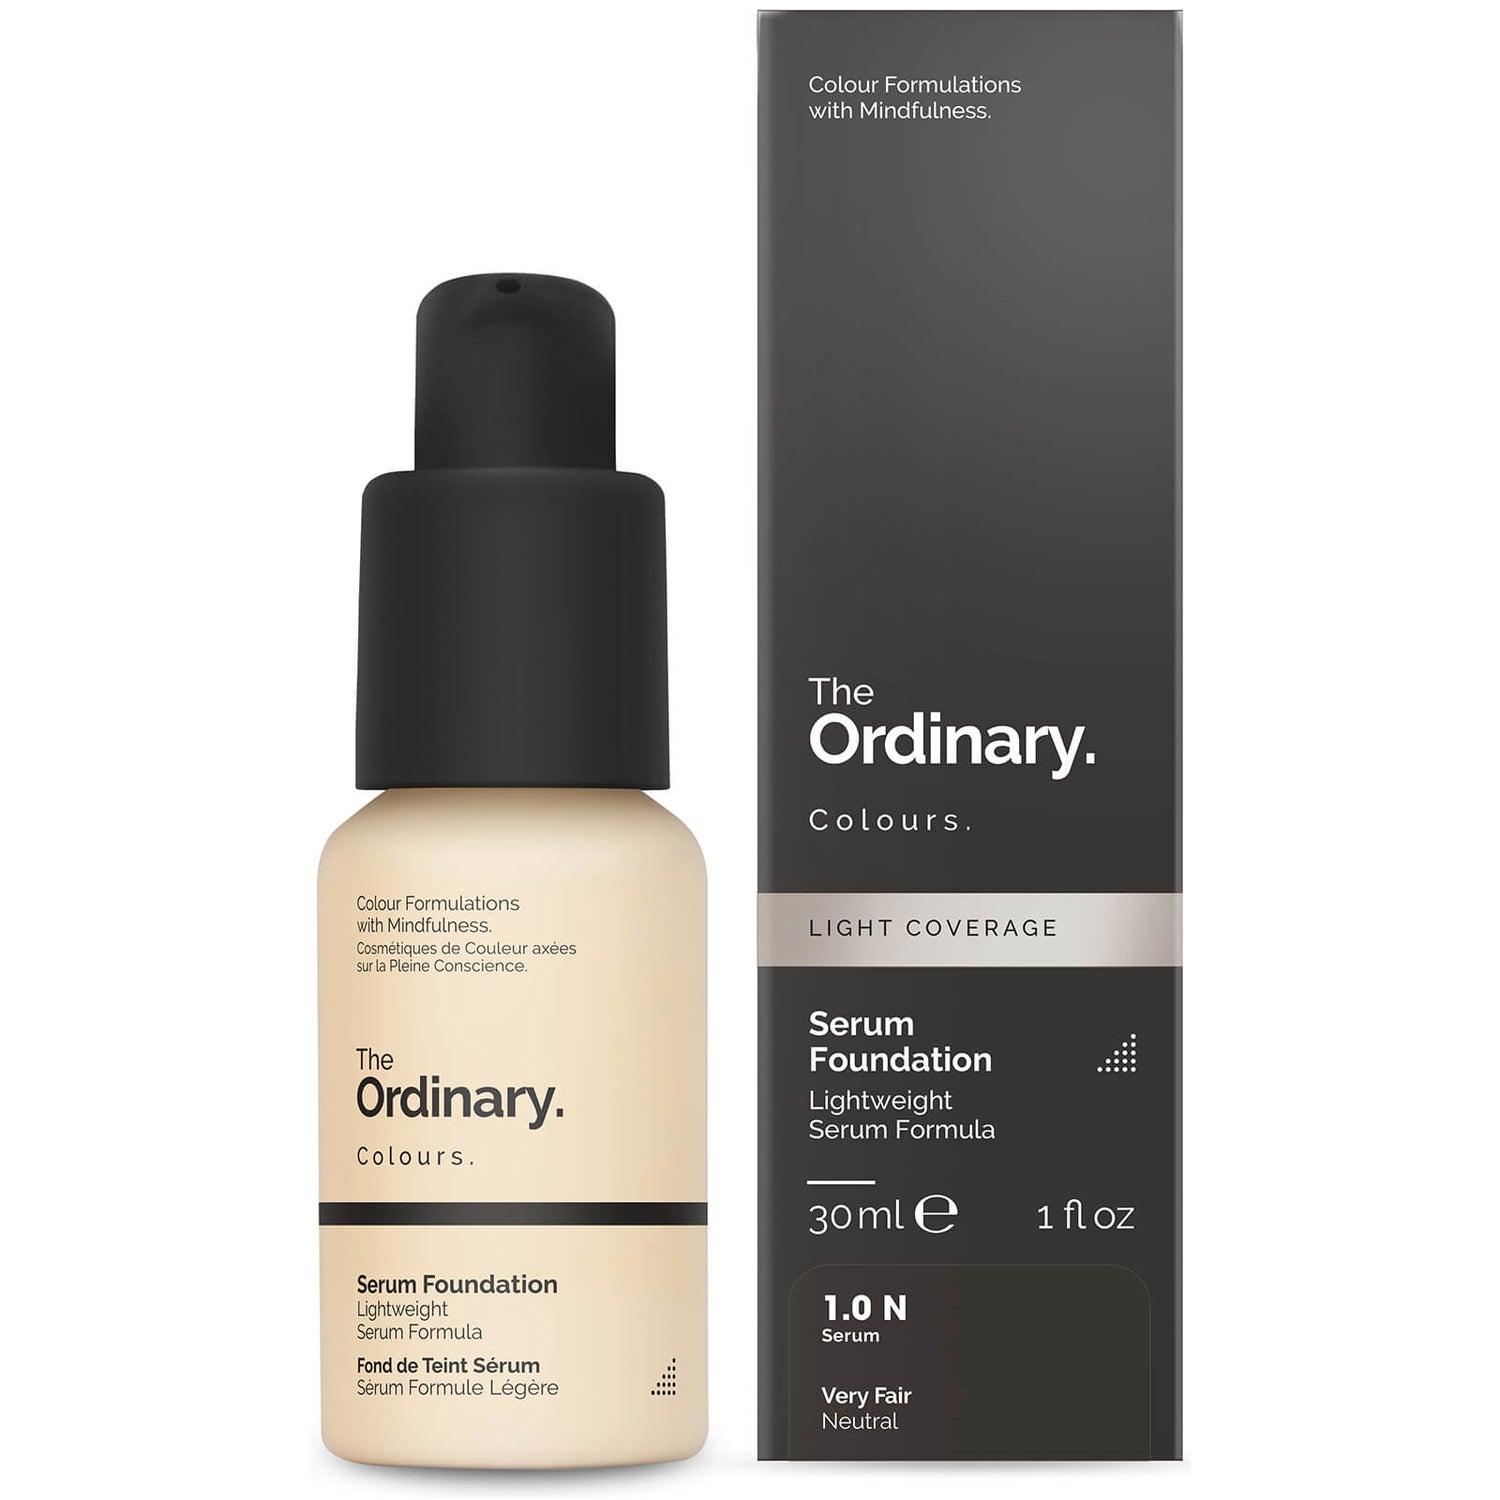 The Ordinary Serum Foundation with SPF 15 by The Ordinary Colours 30ml (Various Shades) - 1.0N